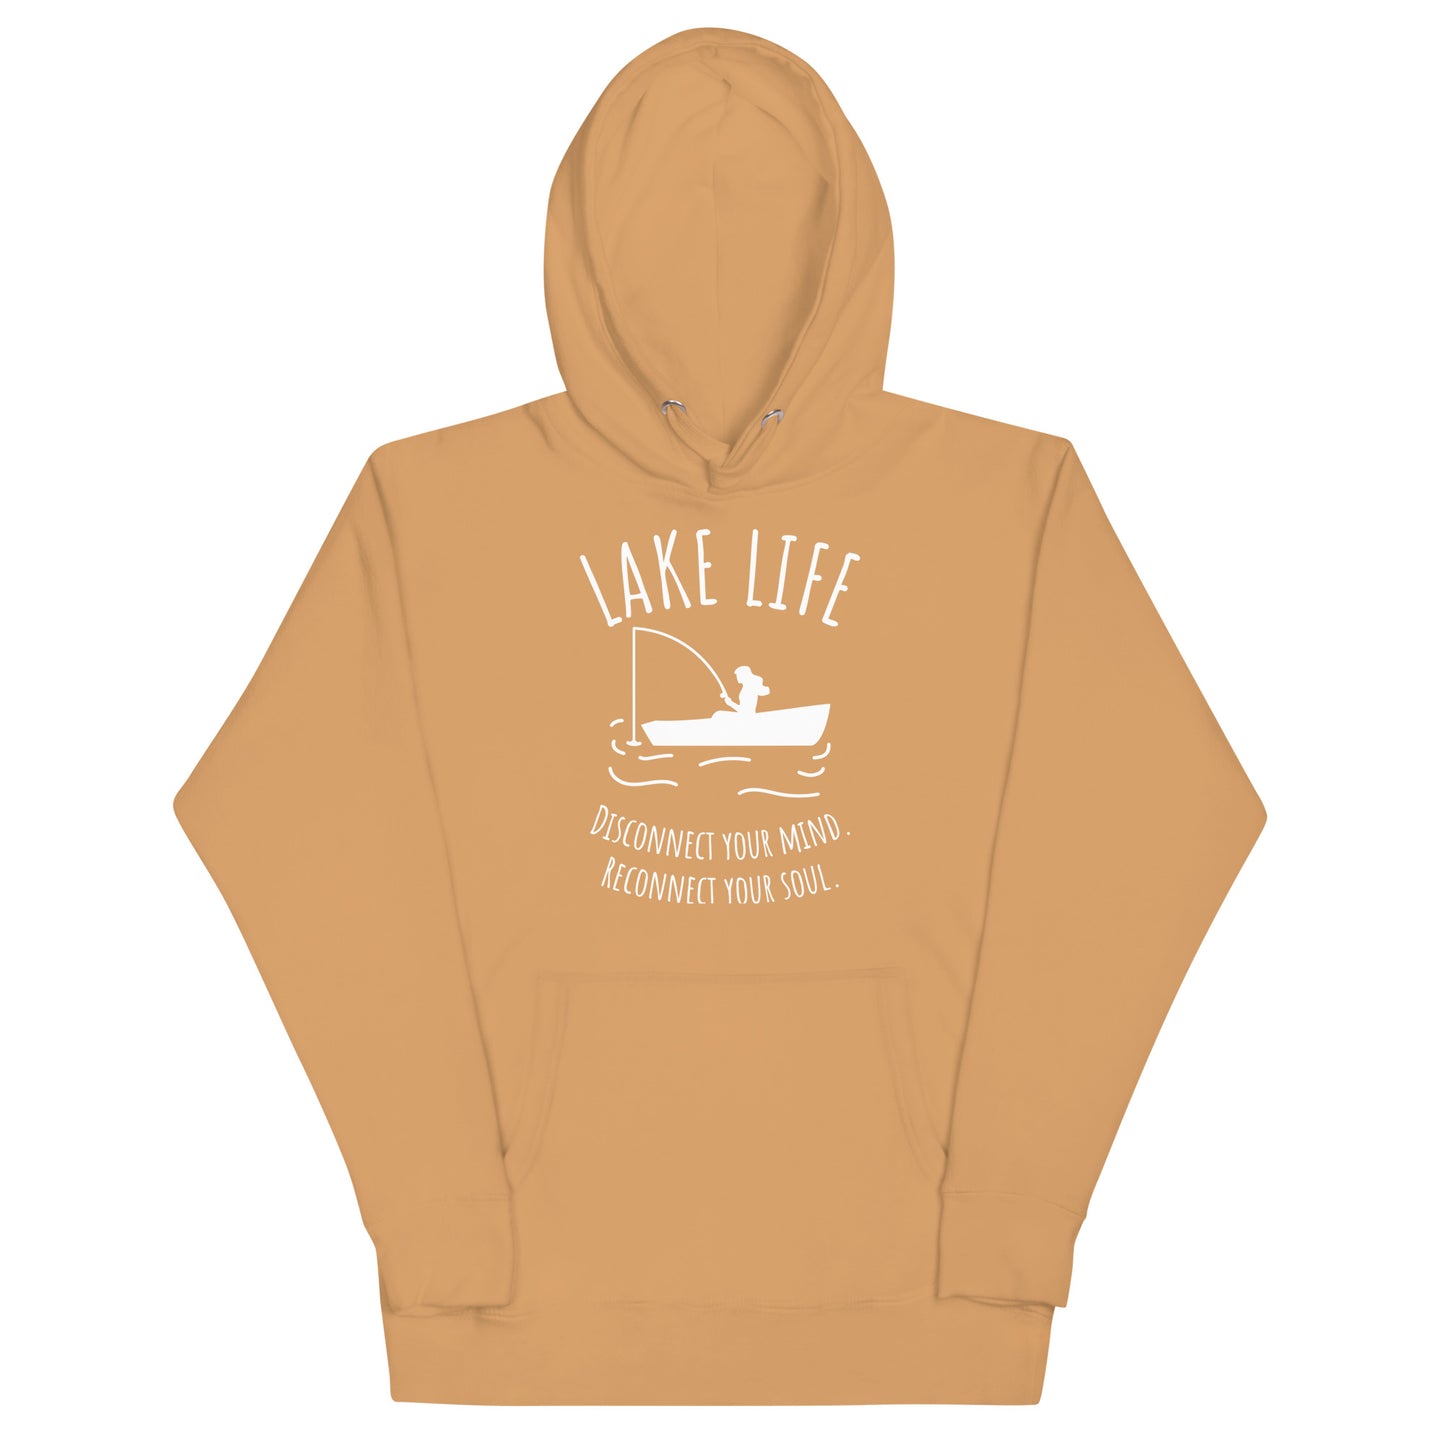 Lake Life - Disconnect your mind, Reconnect your soul Unisex Hoodie (White design)